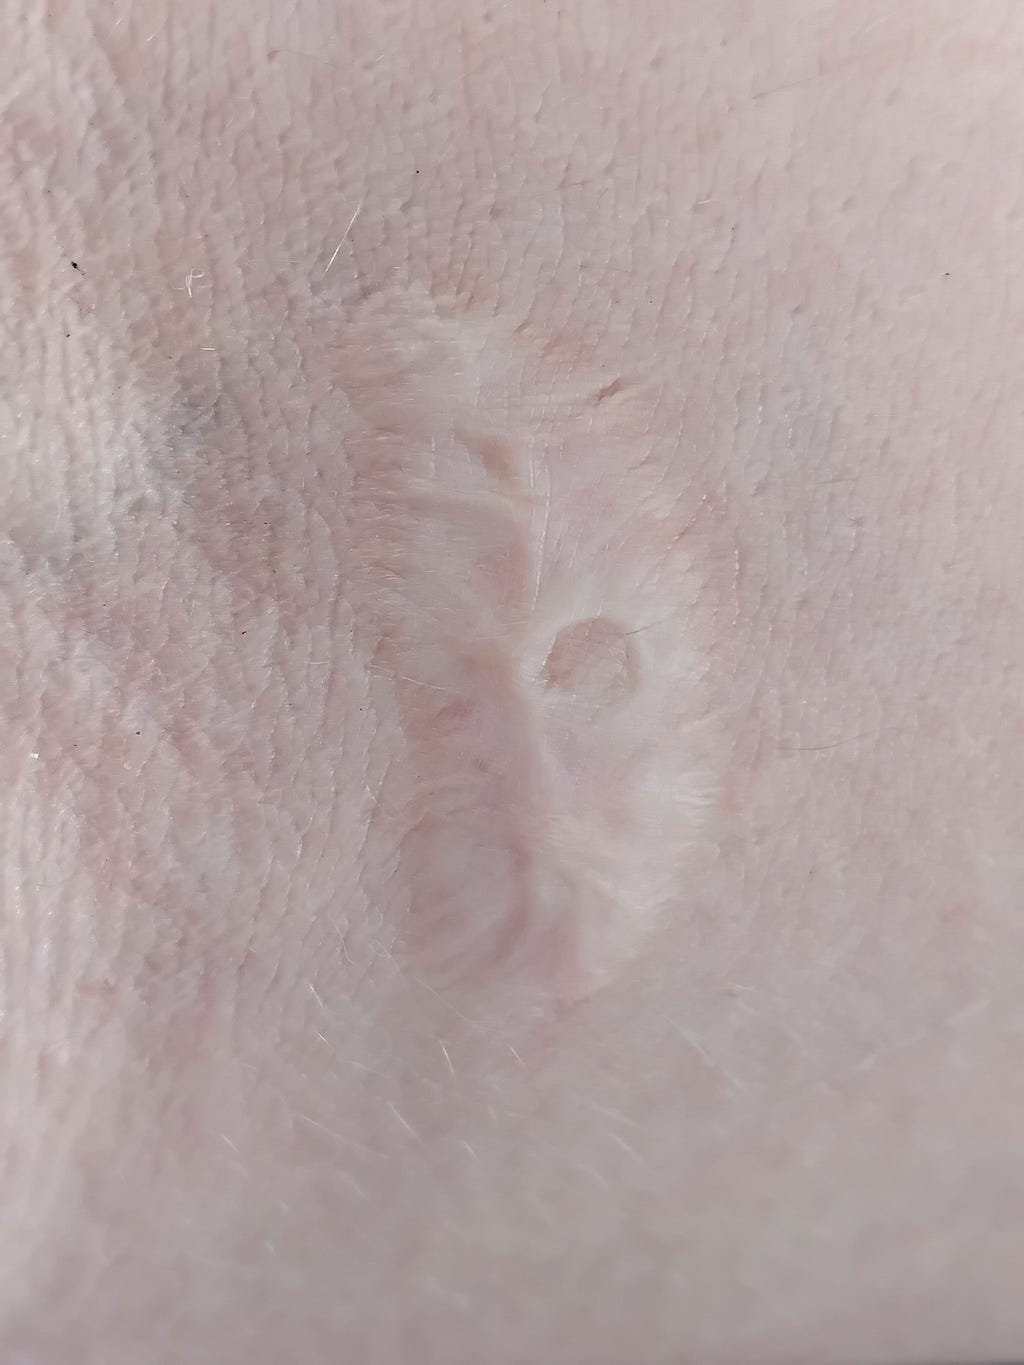 A close-up of a lighter burn scar in crook of elbow on a caucasian arm